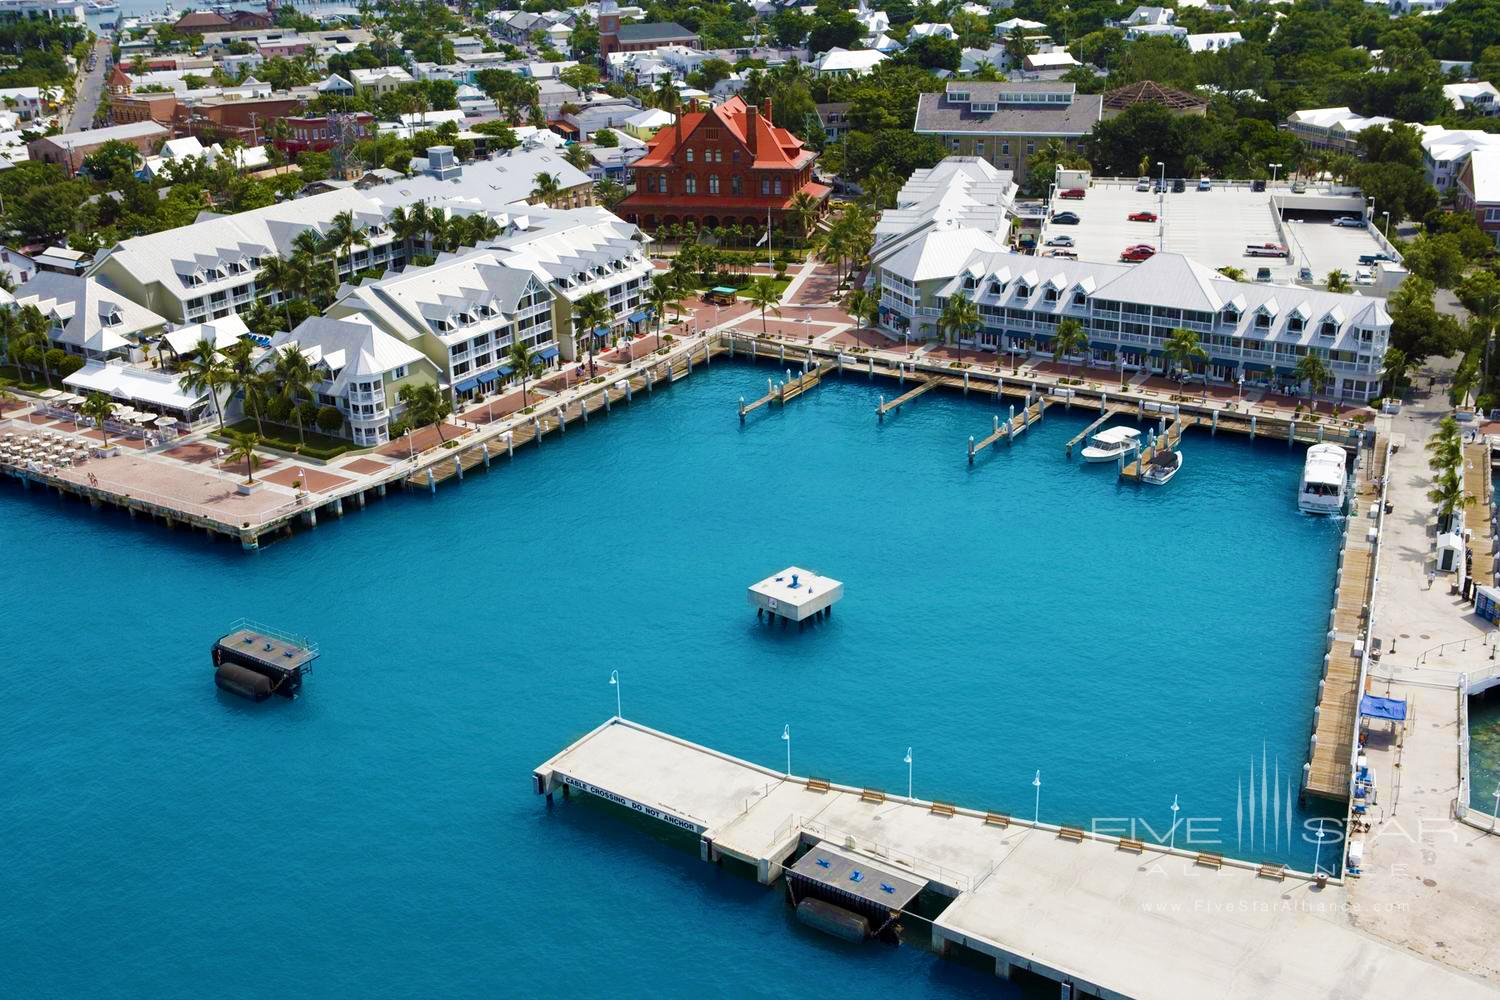 Aerial view of the dock and marina at the Opal Resort Key West - formerly the Margaritaville Resort